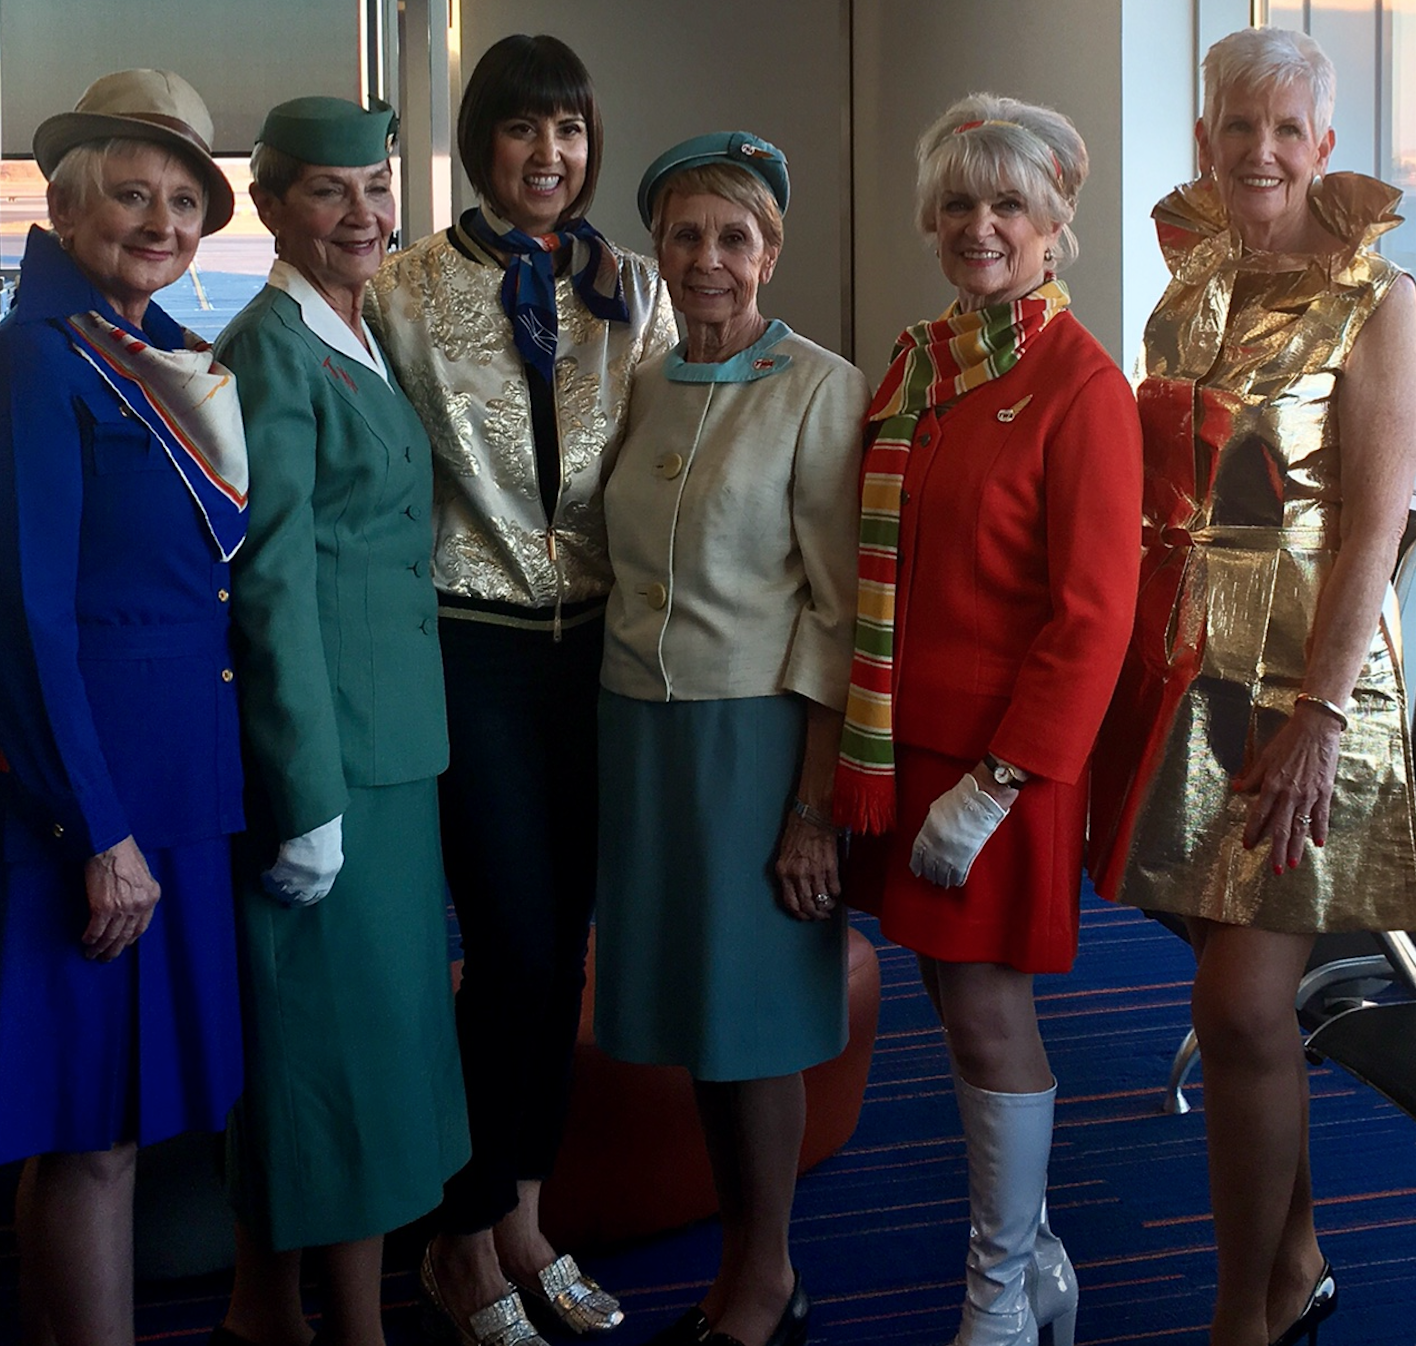 Former TWA flight attendants pose with Trina Turk after the fashion show.